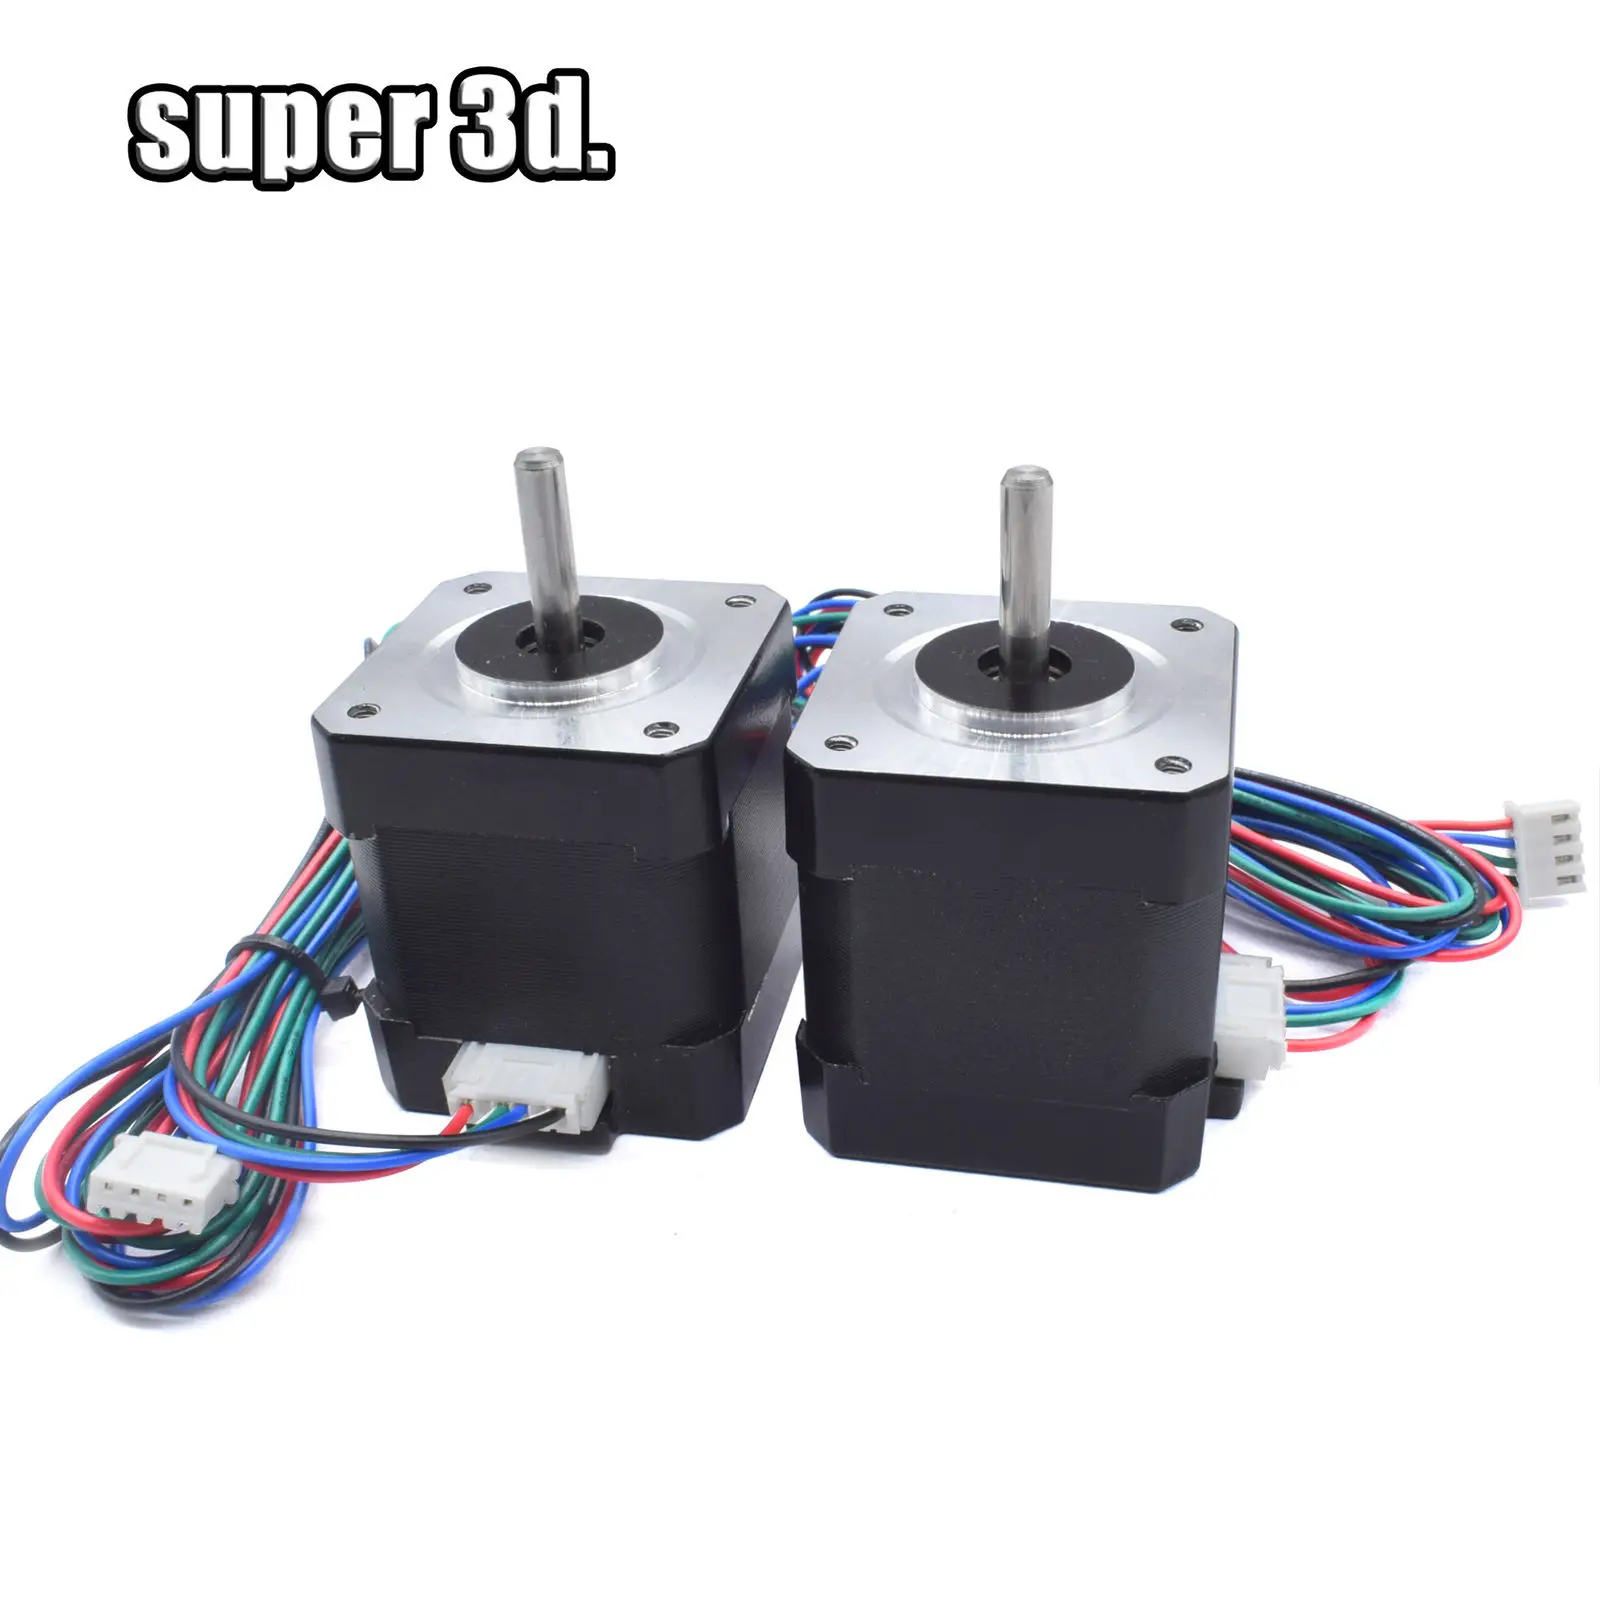 Nema 17 42 Stepper Motor Height 26mm 34mm 40mm 48mm Motor 4-lead 12-24V   with Cables for 3D Printer J-head Extruder CNC Parts